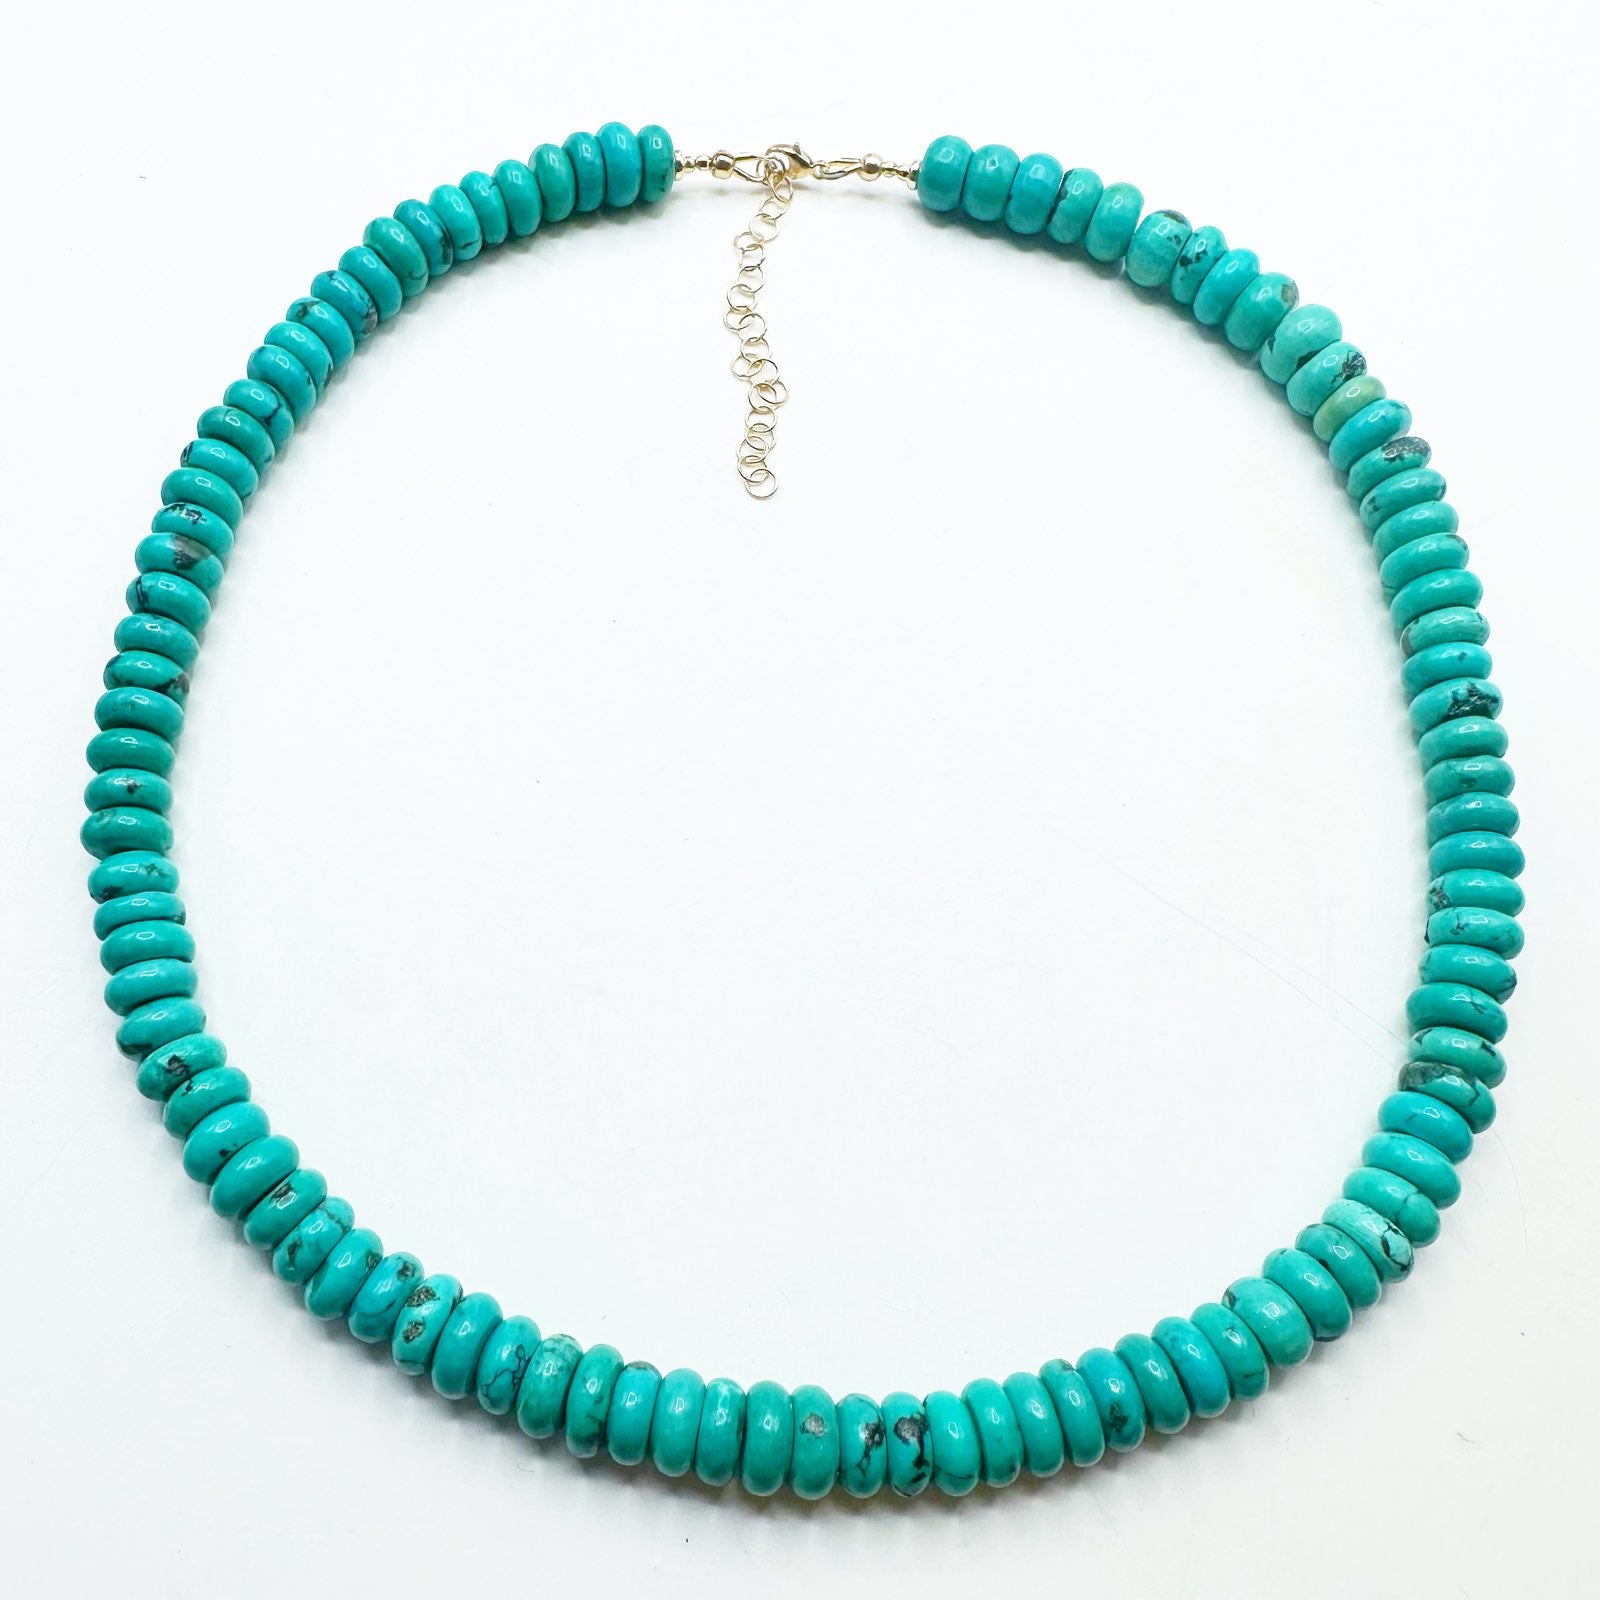 6MM & 8MM TURQUOISE NECKLACES